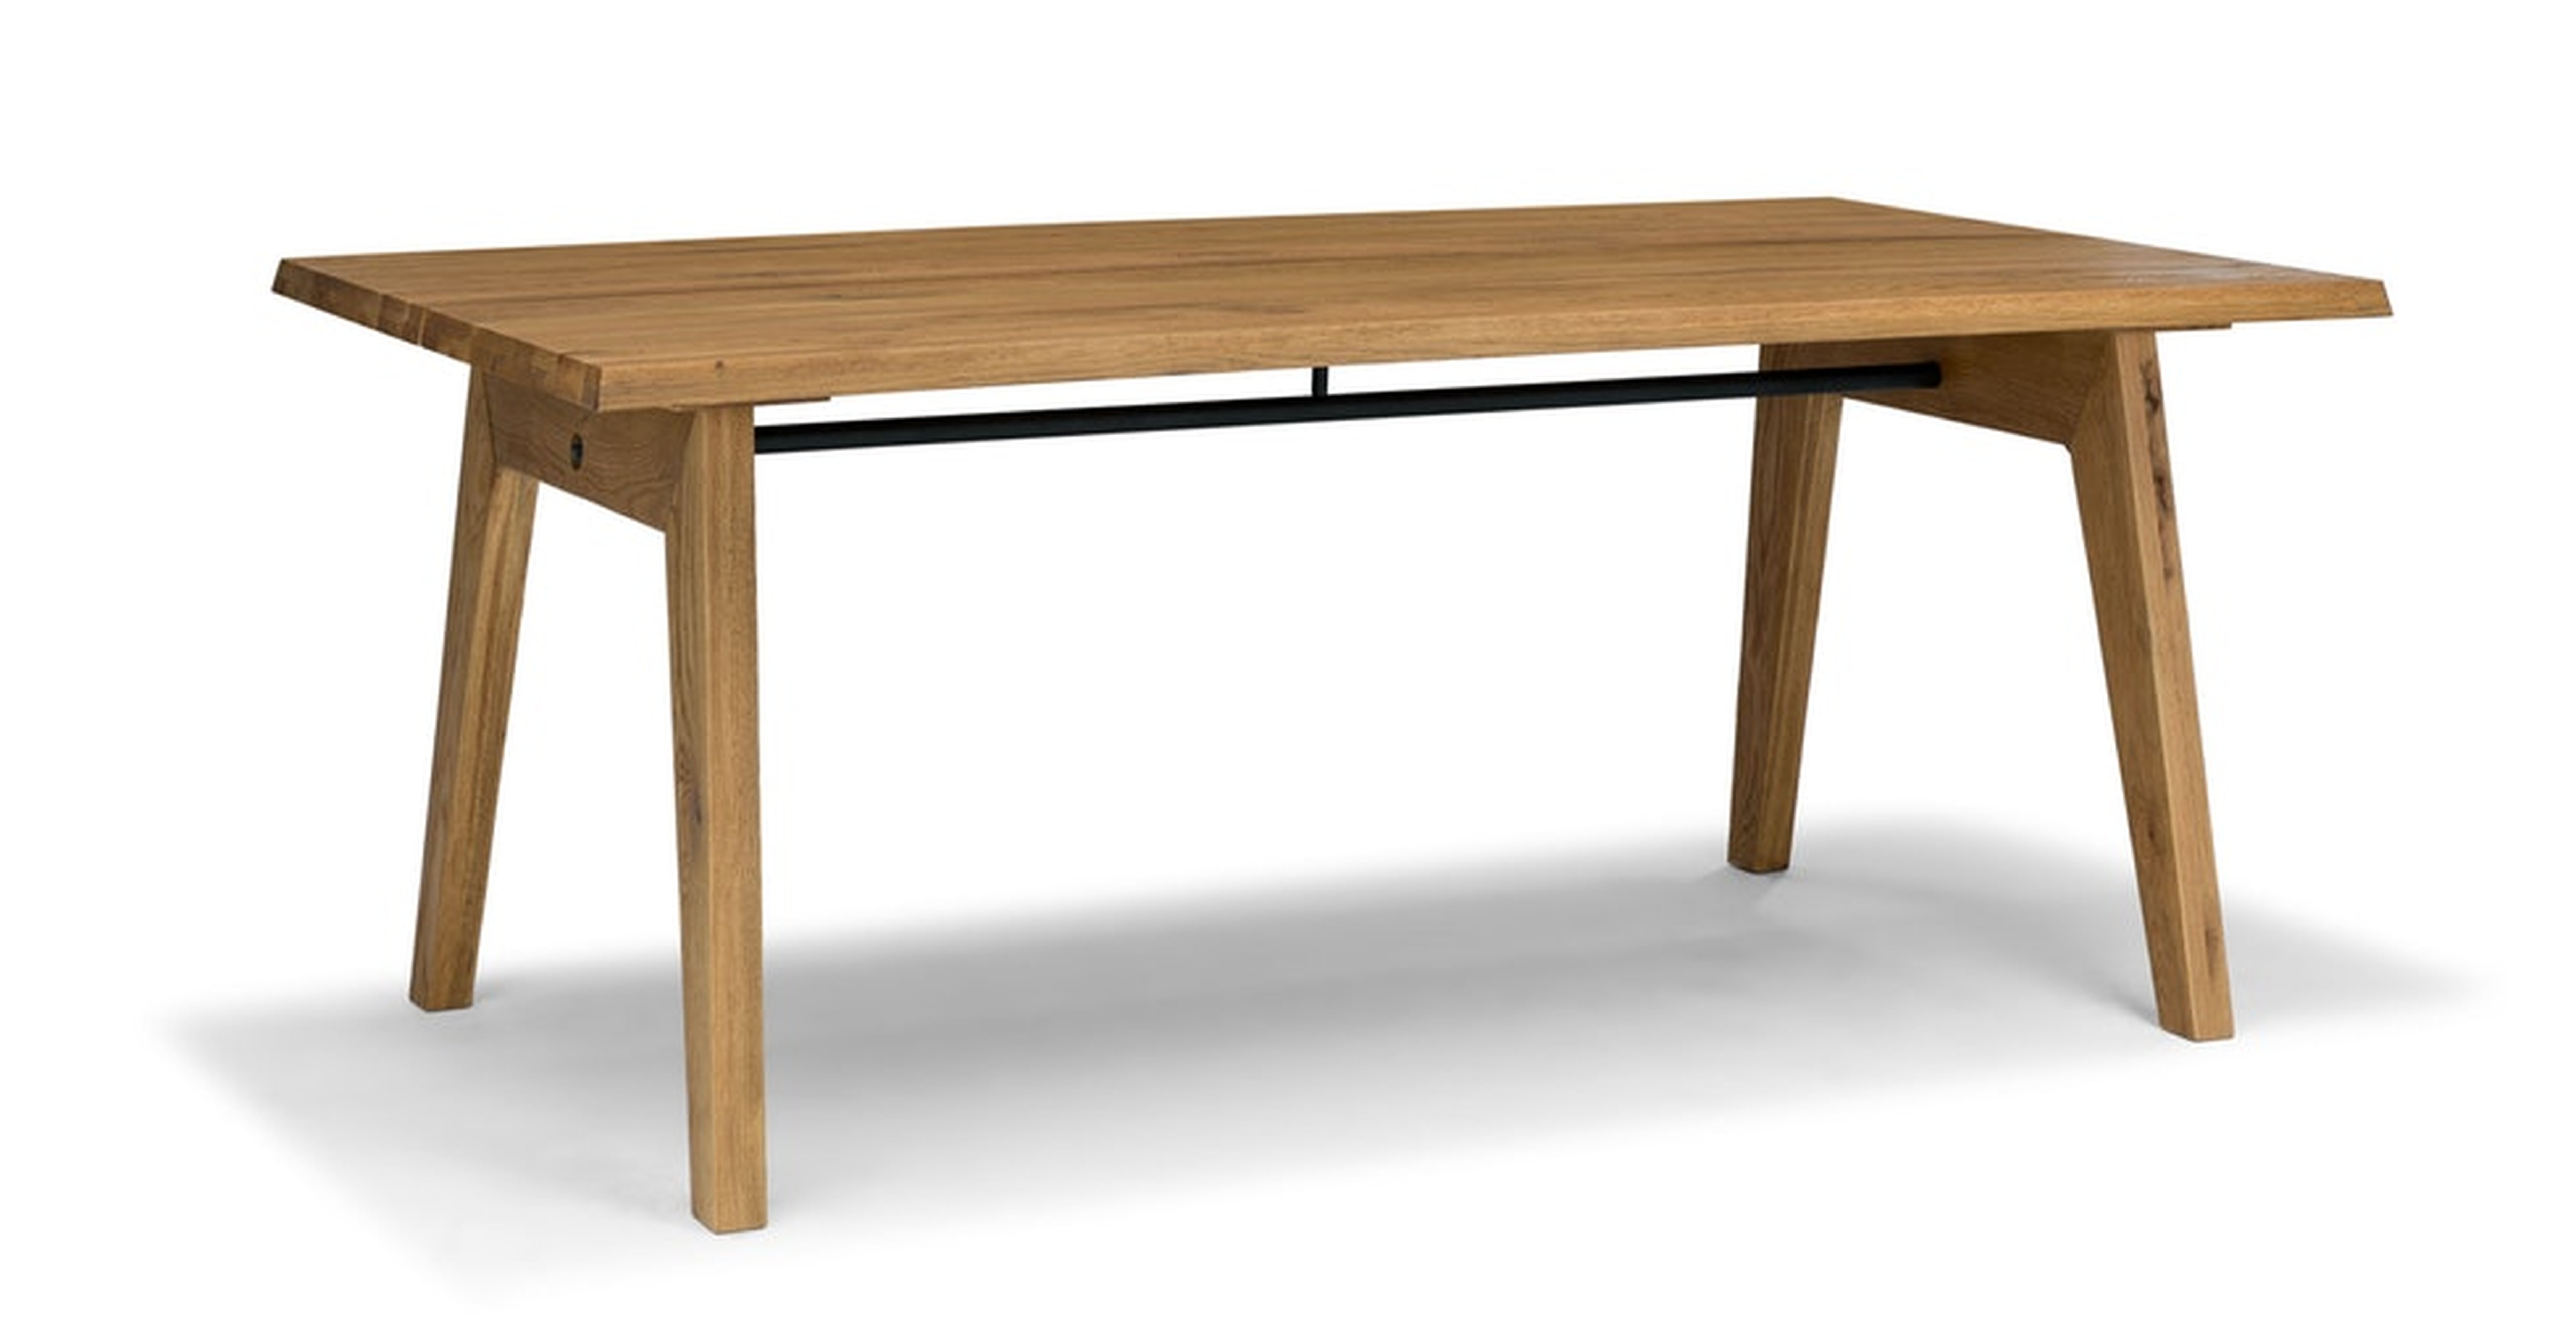 Madera Oak Dining Table For 6 - Article